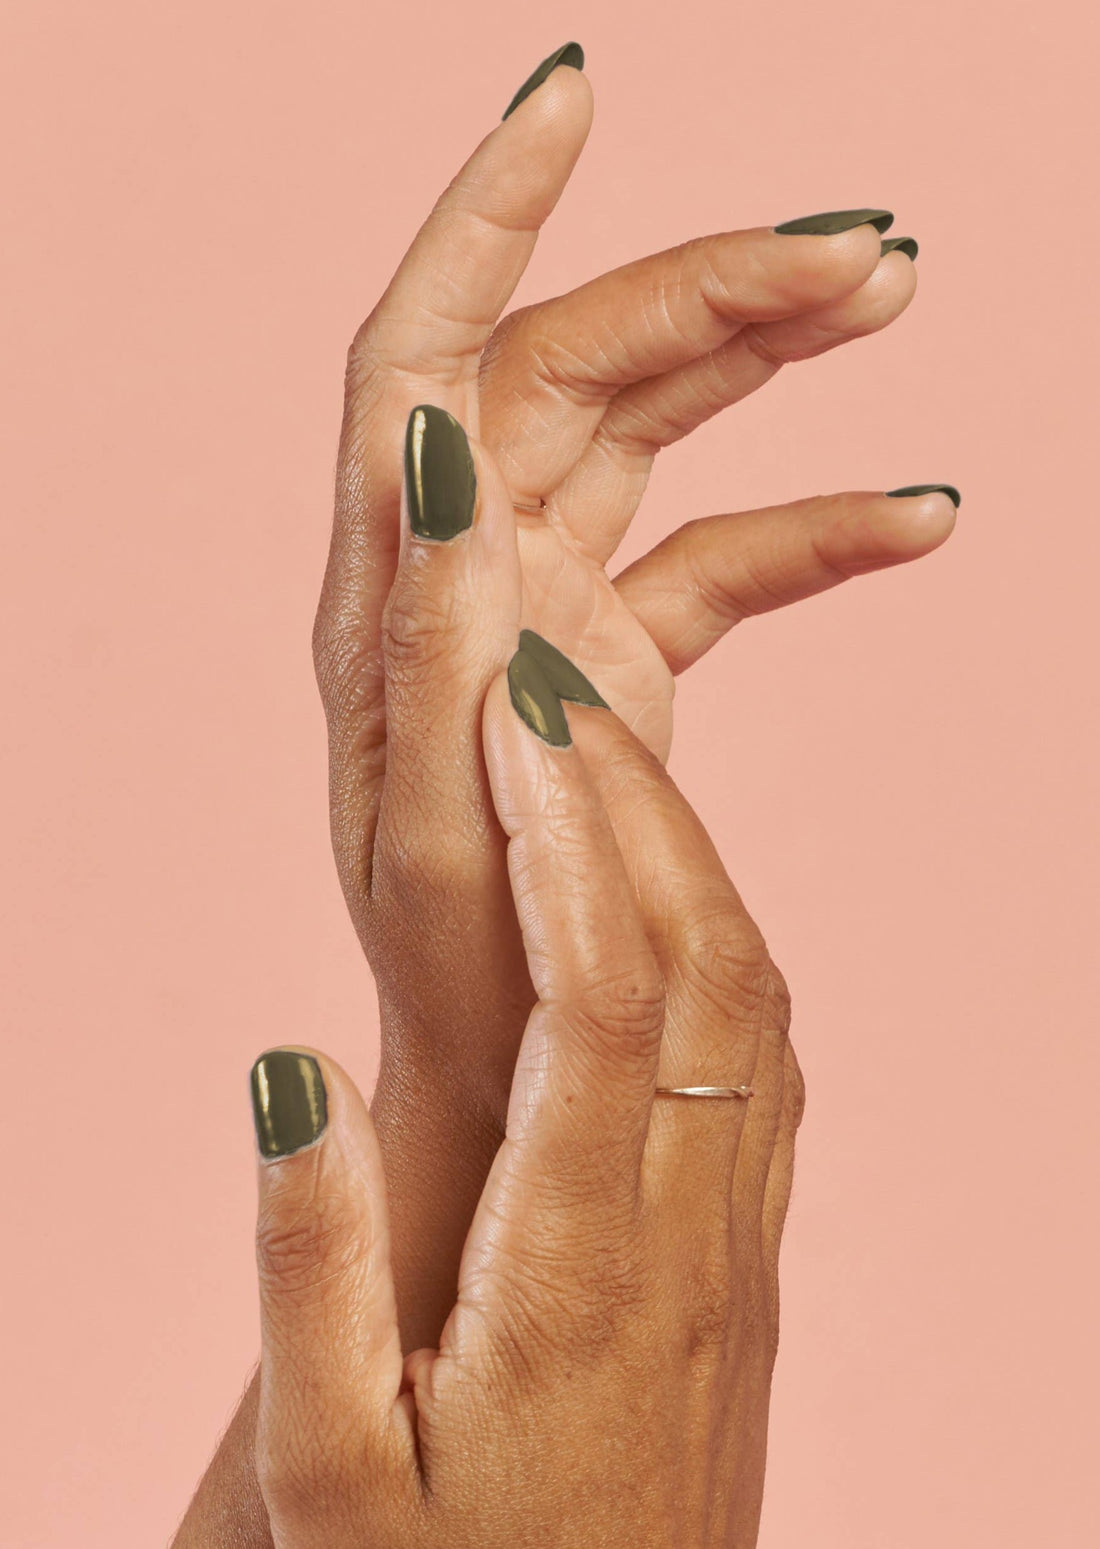 Models Hands with La Route Verte Nail Polish On Nails